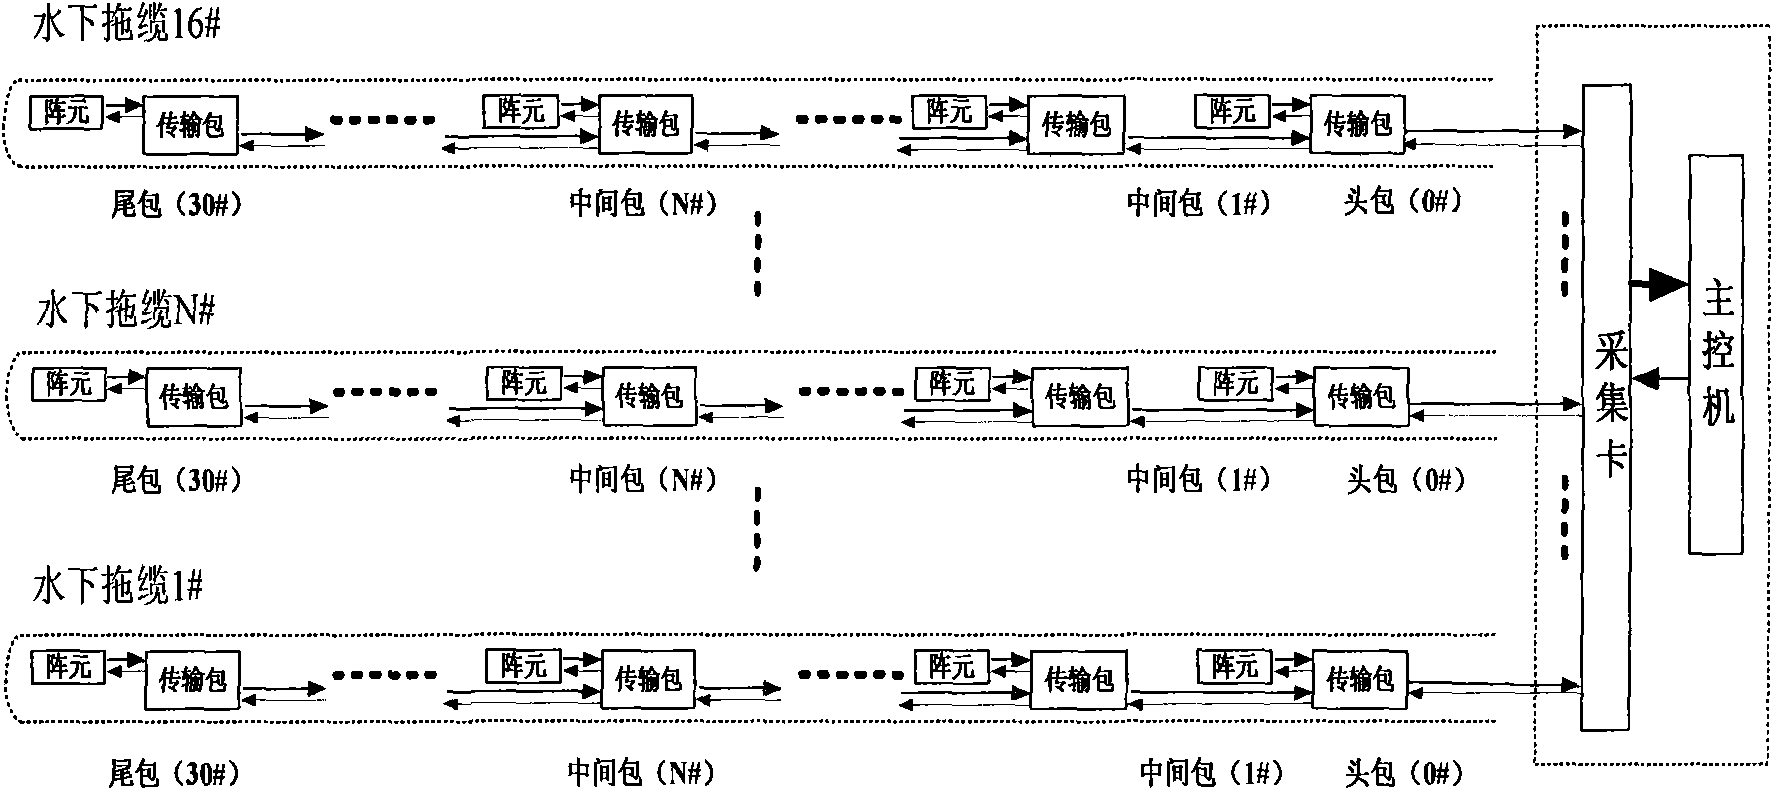 Subaqueous multi-cable positioning system and method thereof.